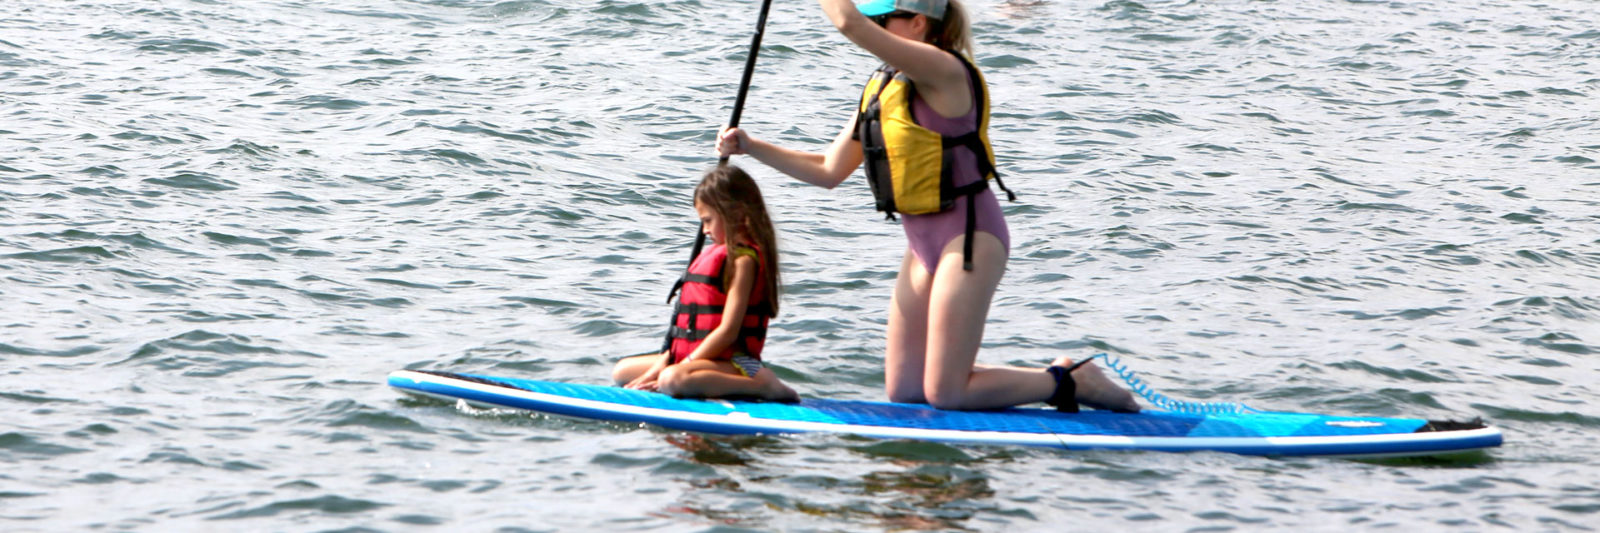 Mother and child SUP on Lake GEneva